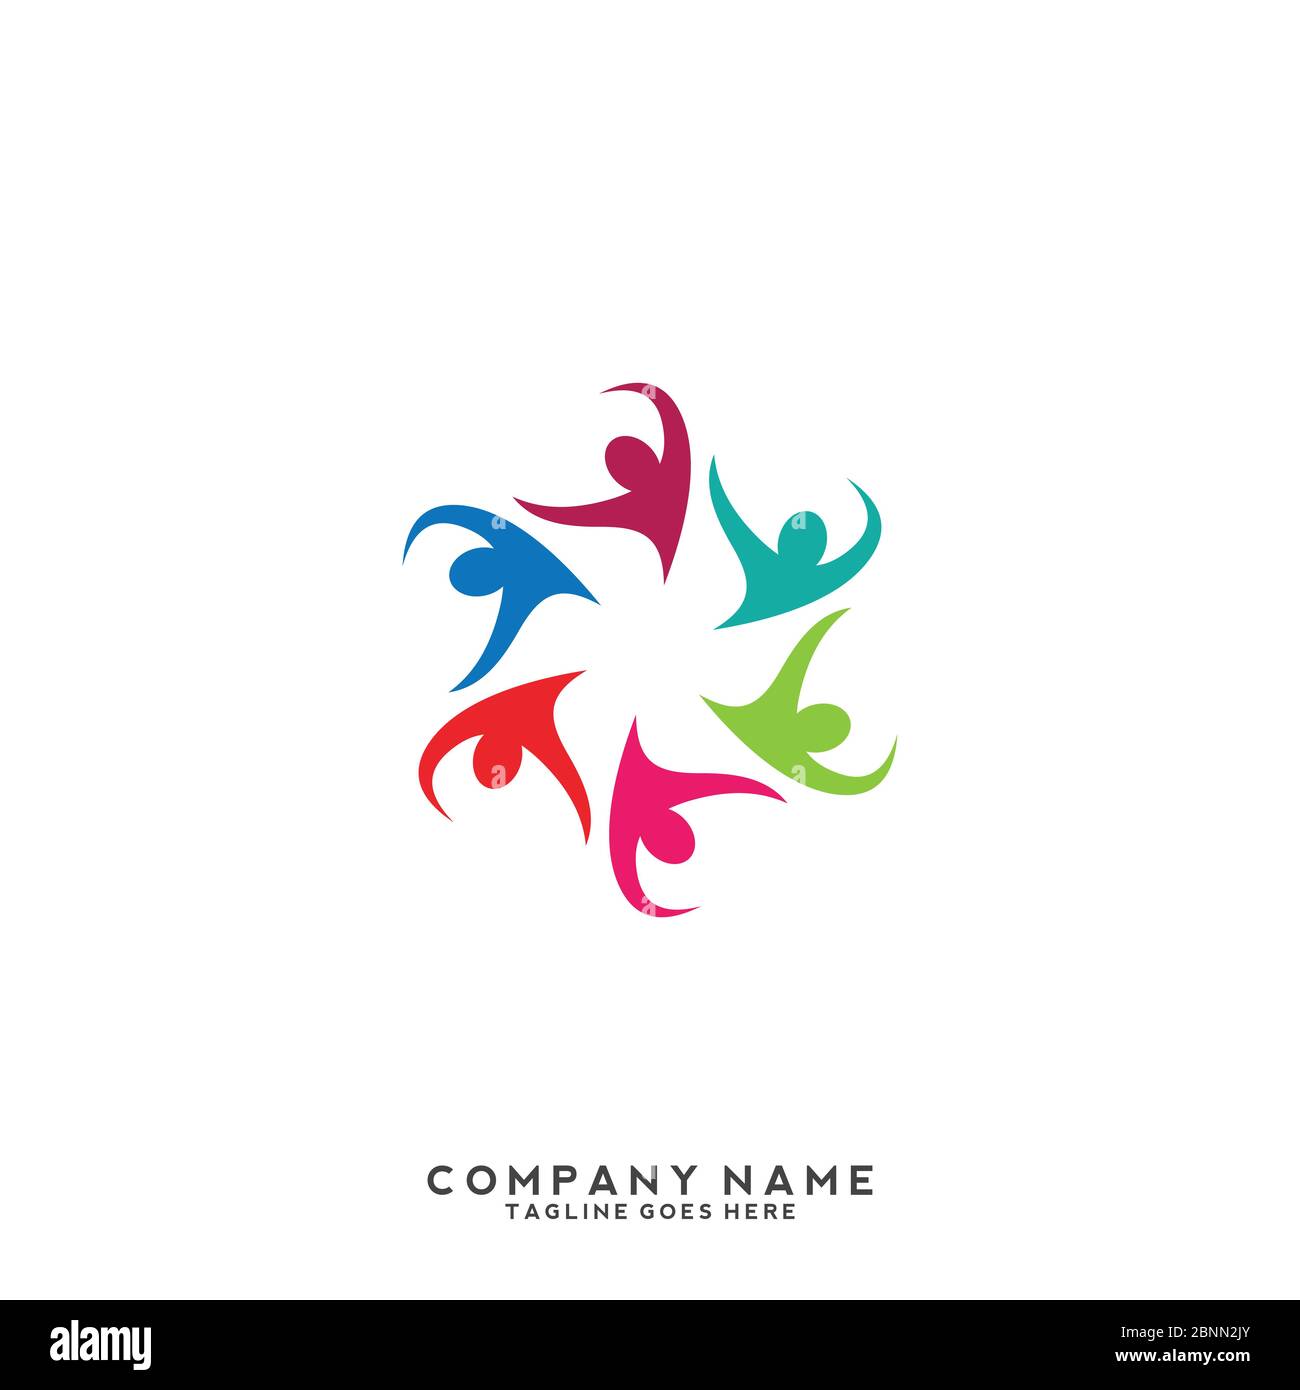 People, community, creative hub, social connection icons and logo Stock Vector